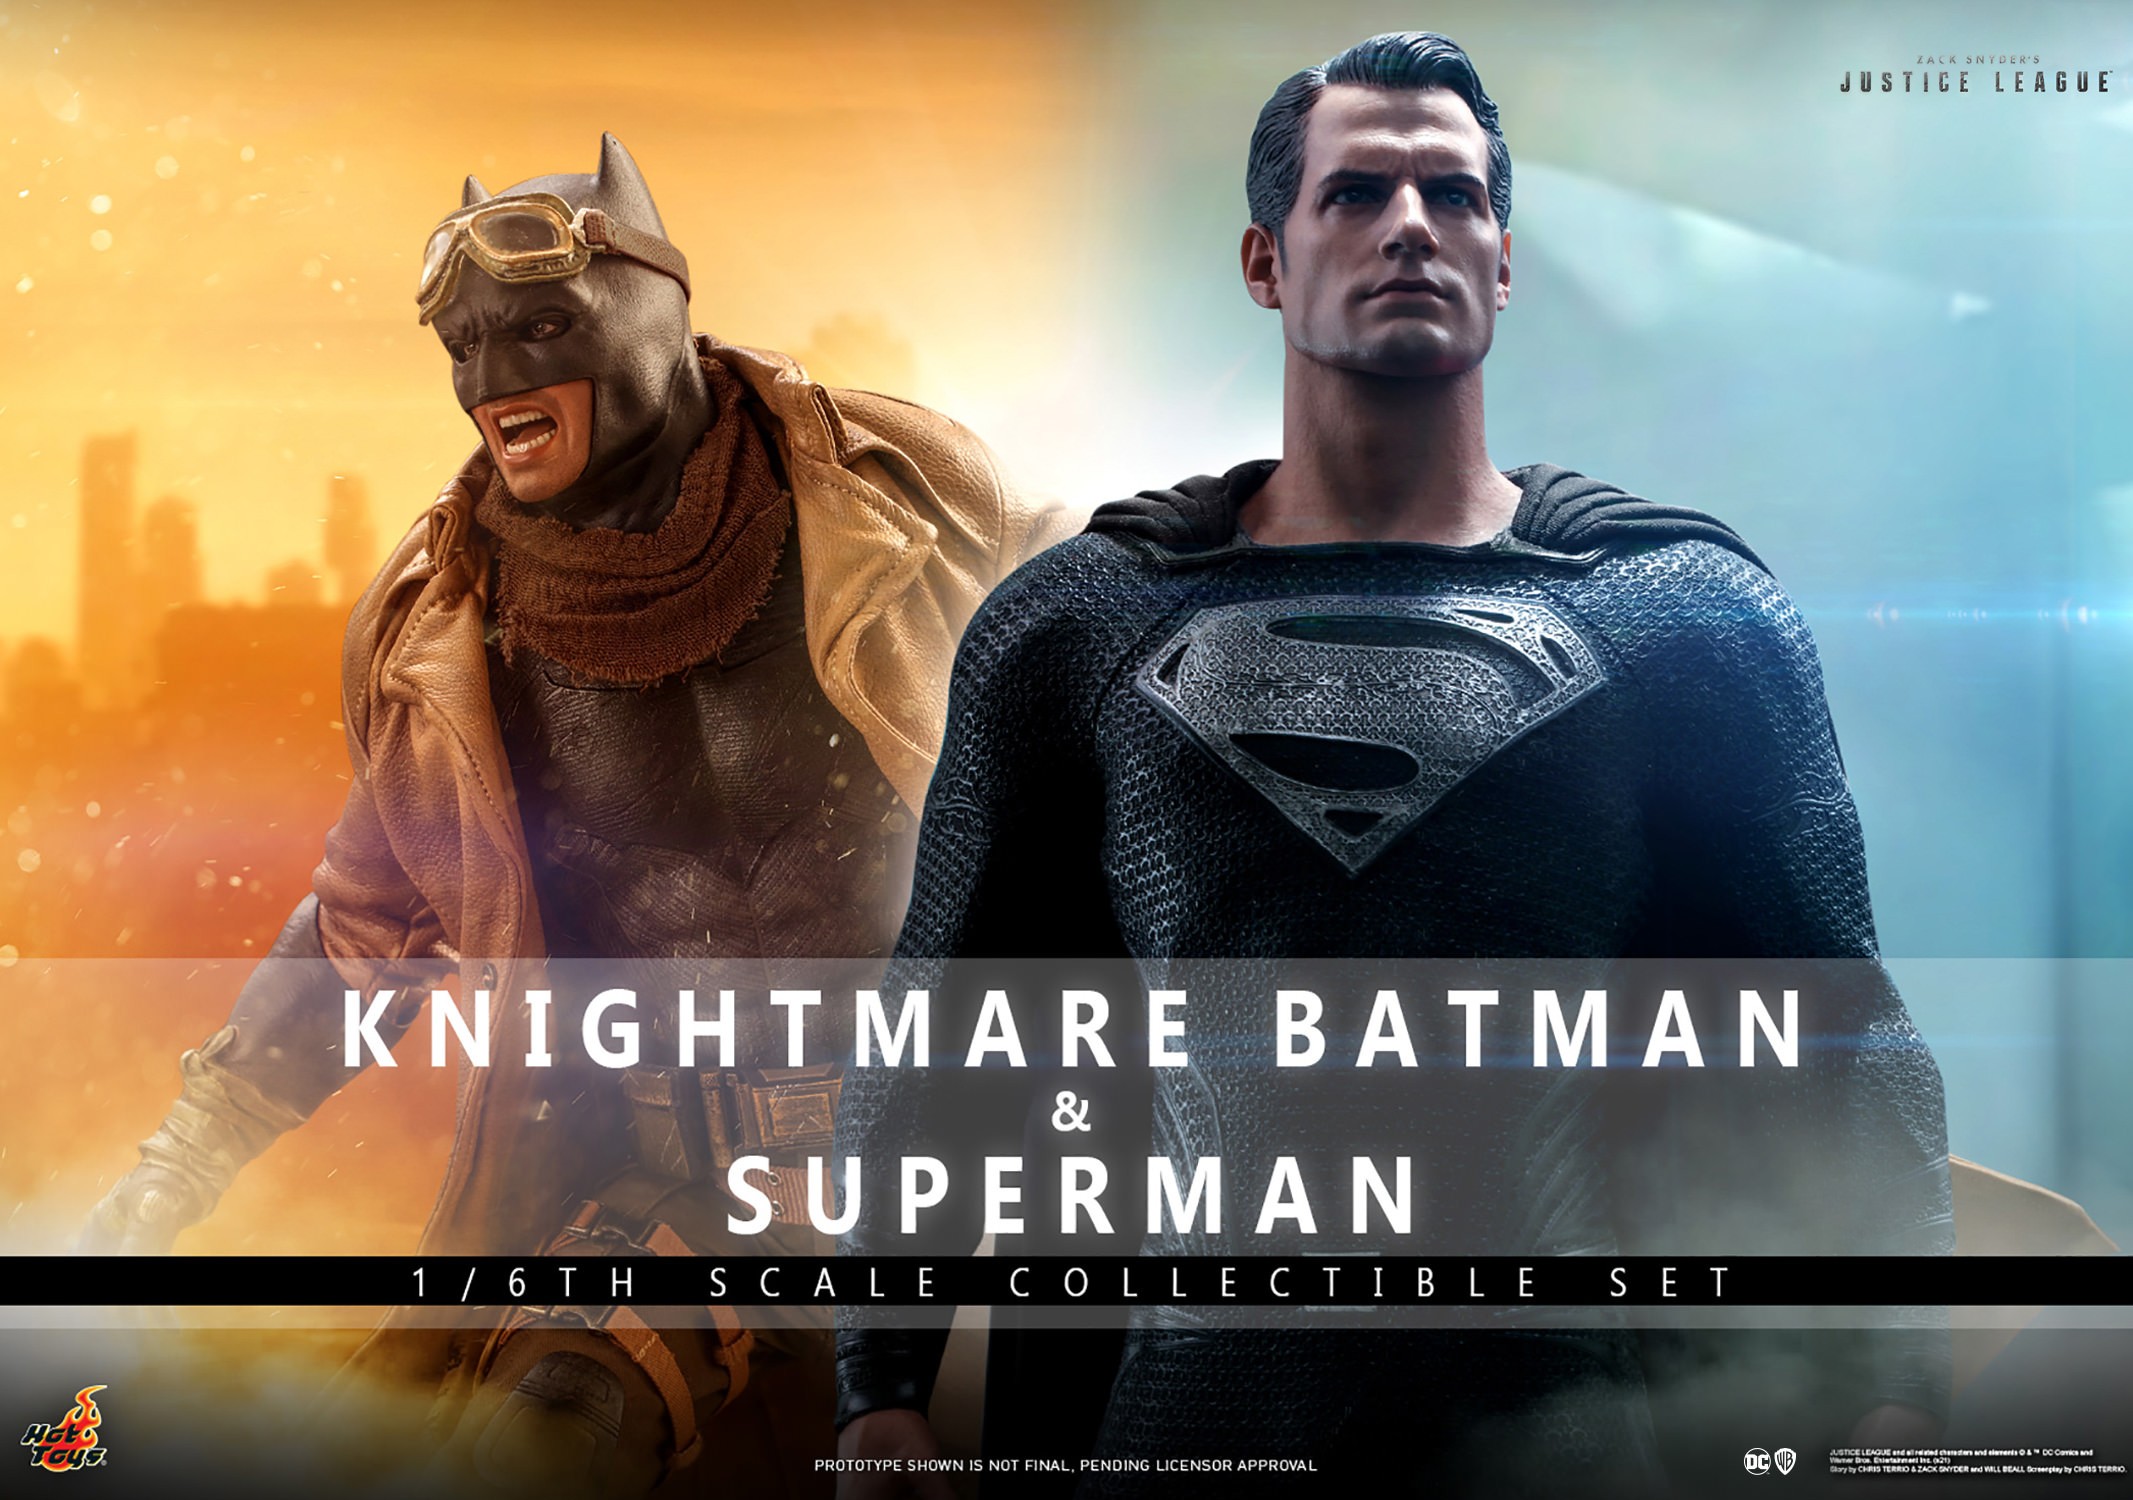 Knightmare Batman and Superman (Prototype Shown) View 1